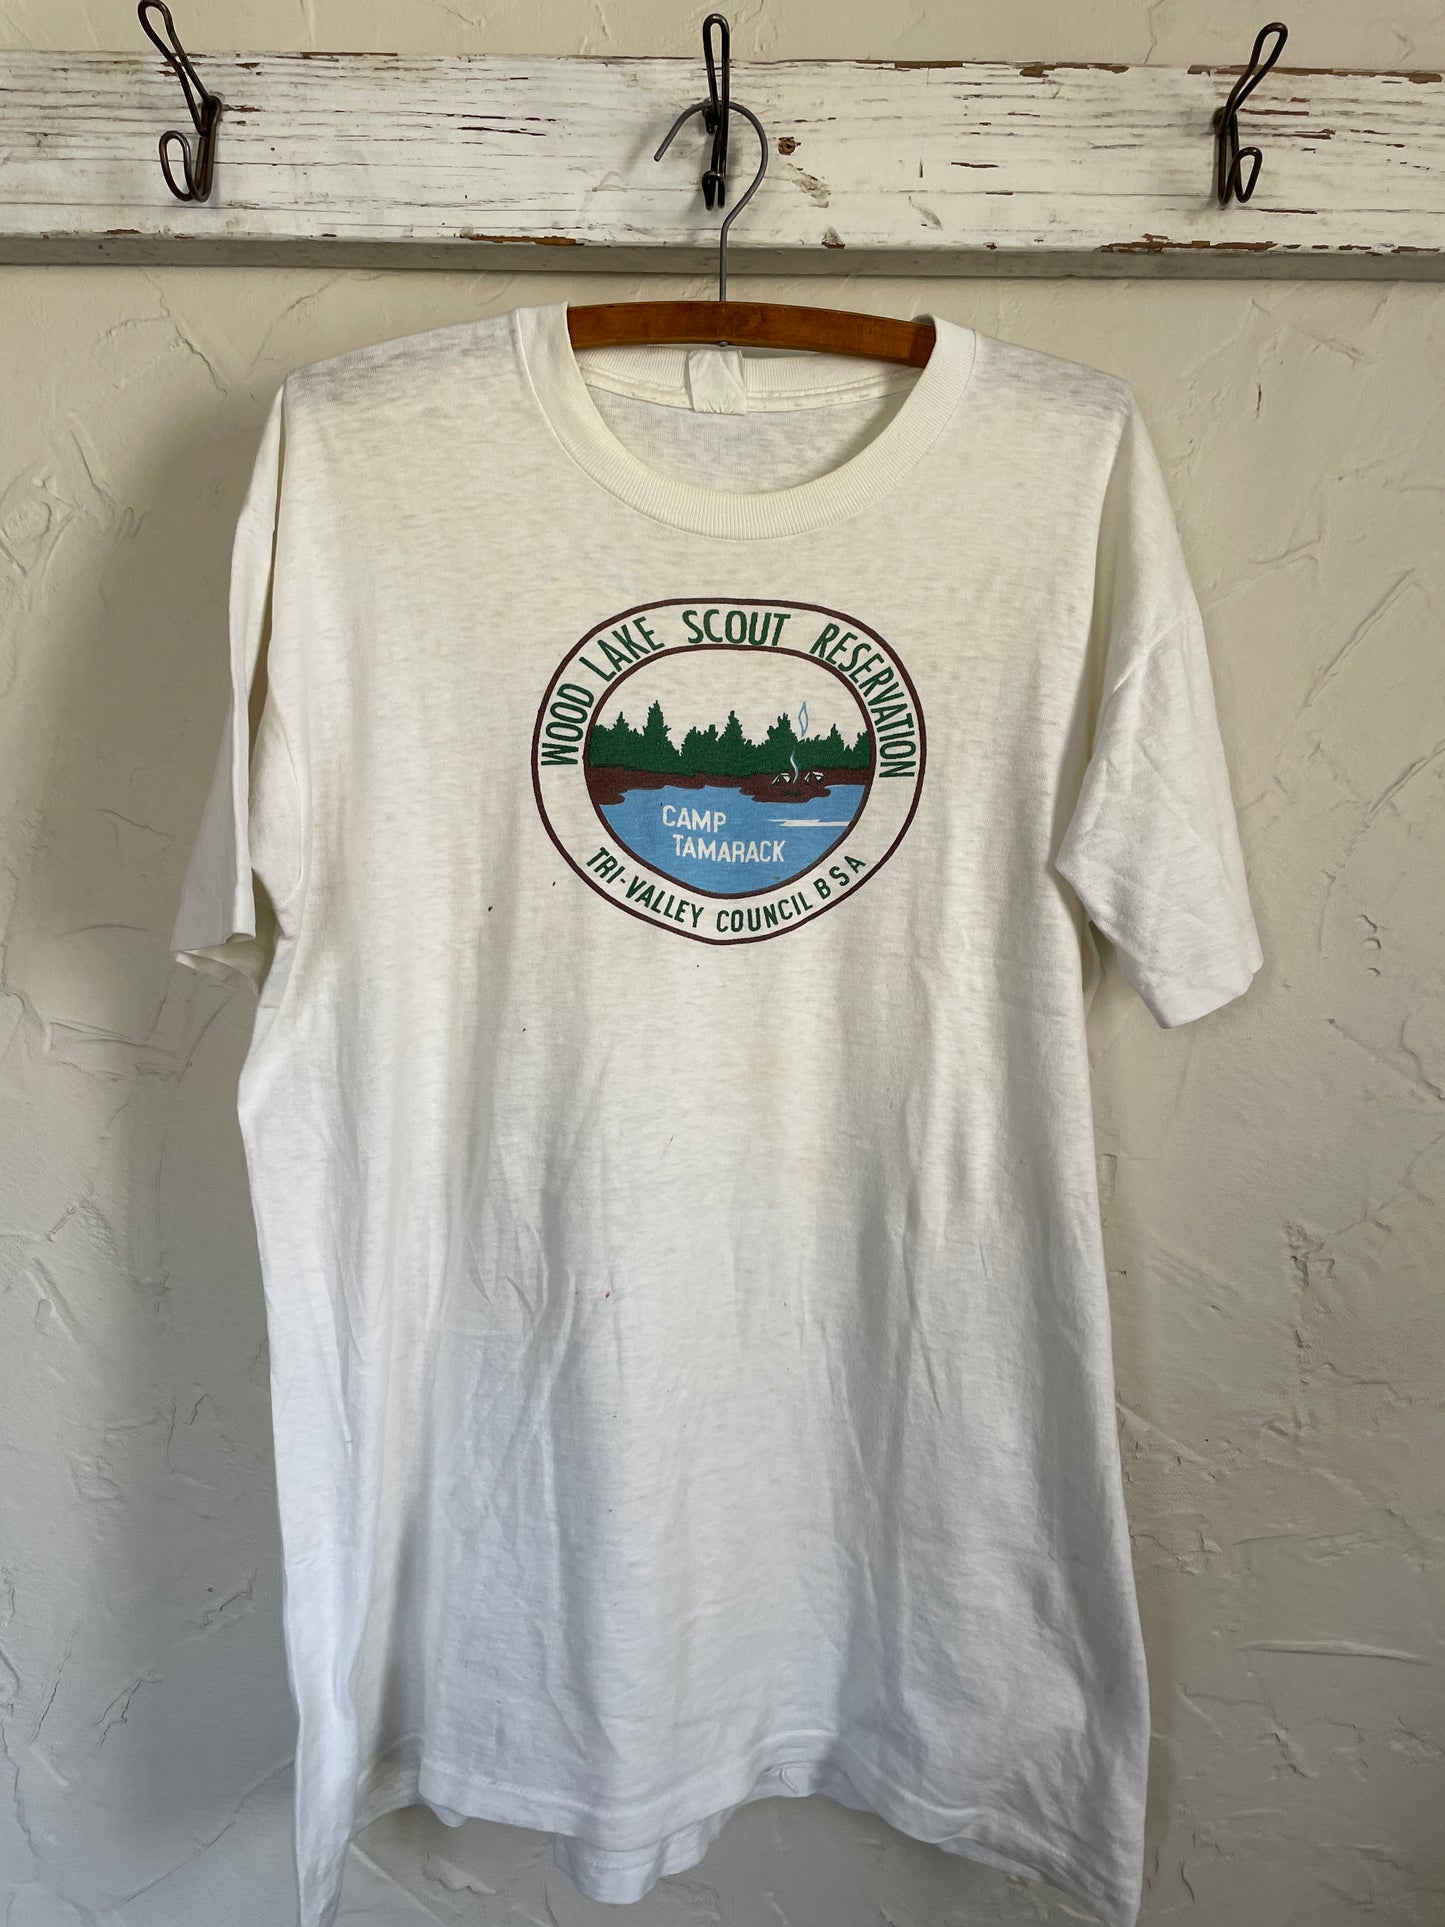 60s Wood Lake Scout Reservation BSA Tee